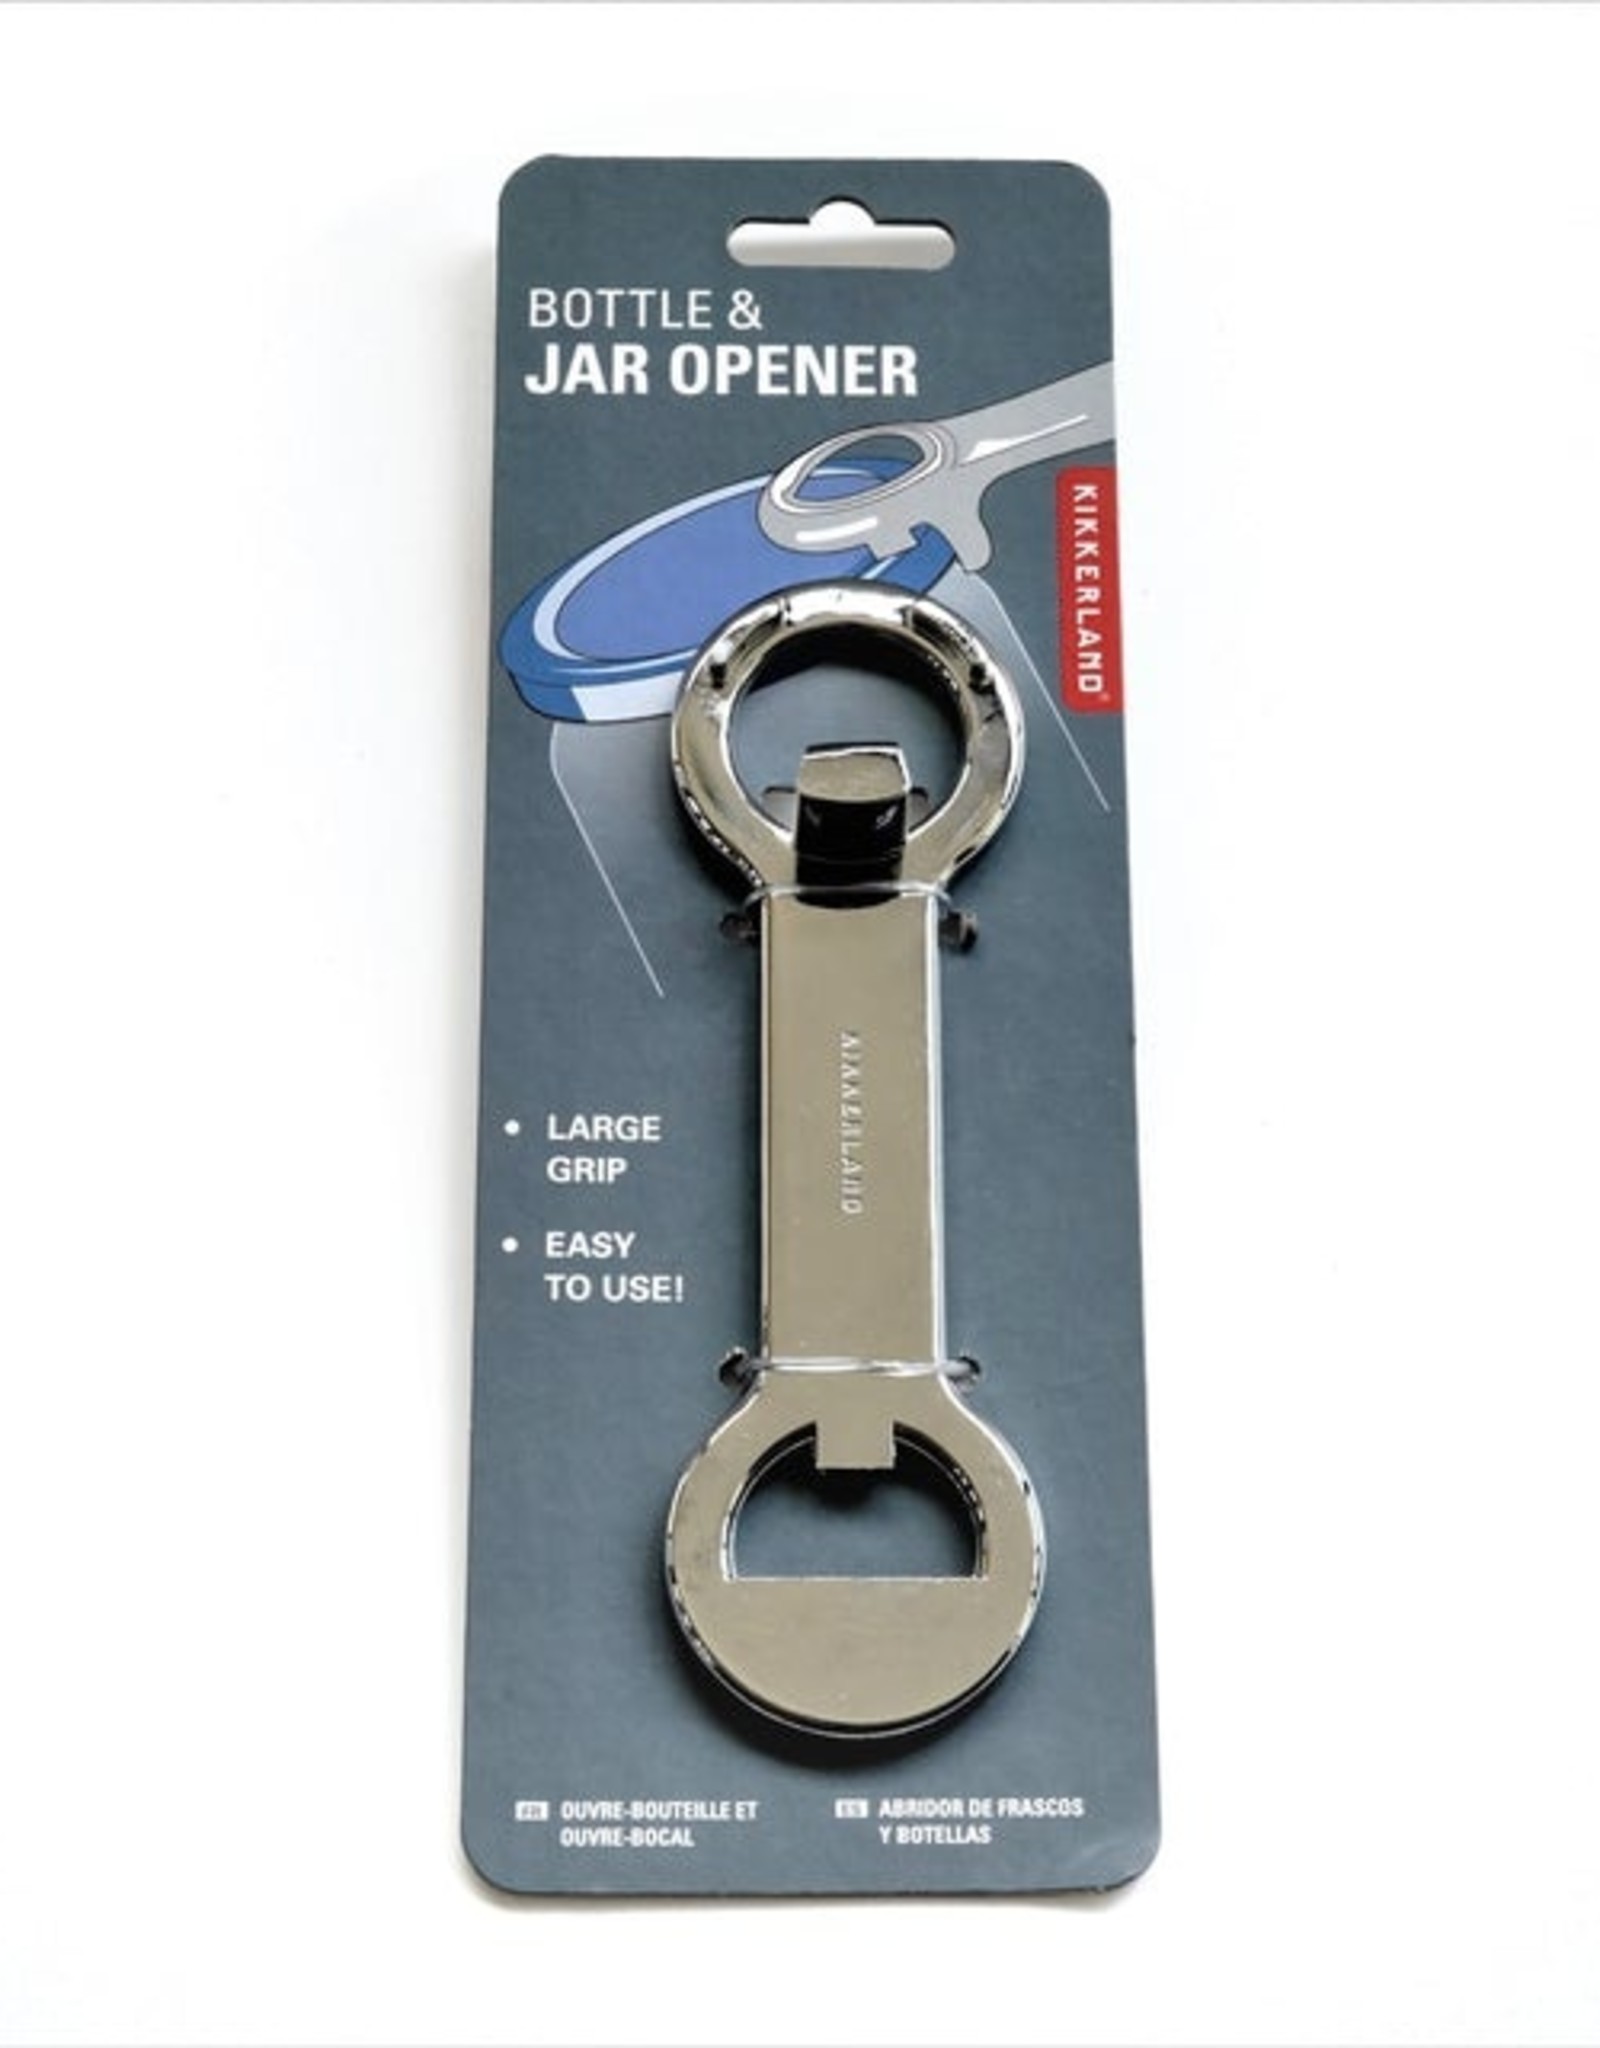 Bottle and Jar Opener - Awesome Brooklyn